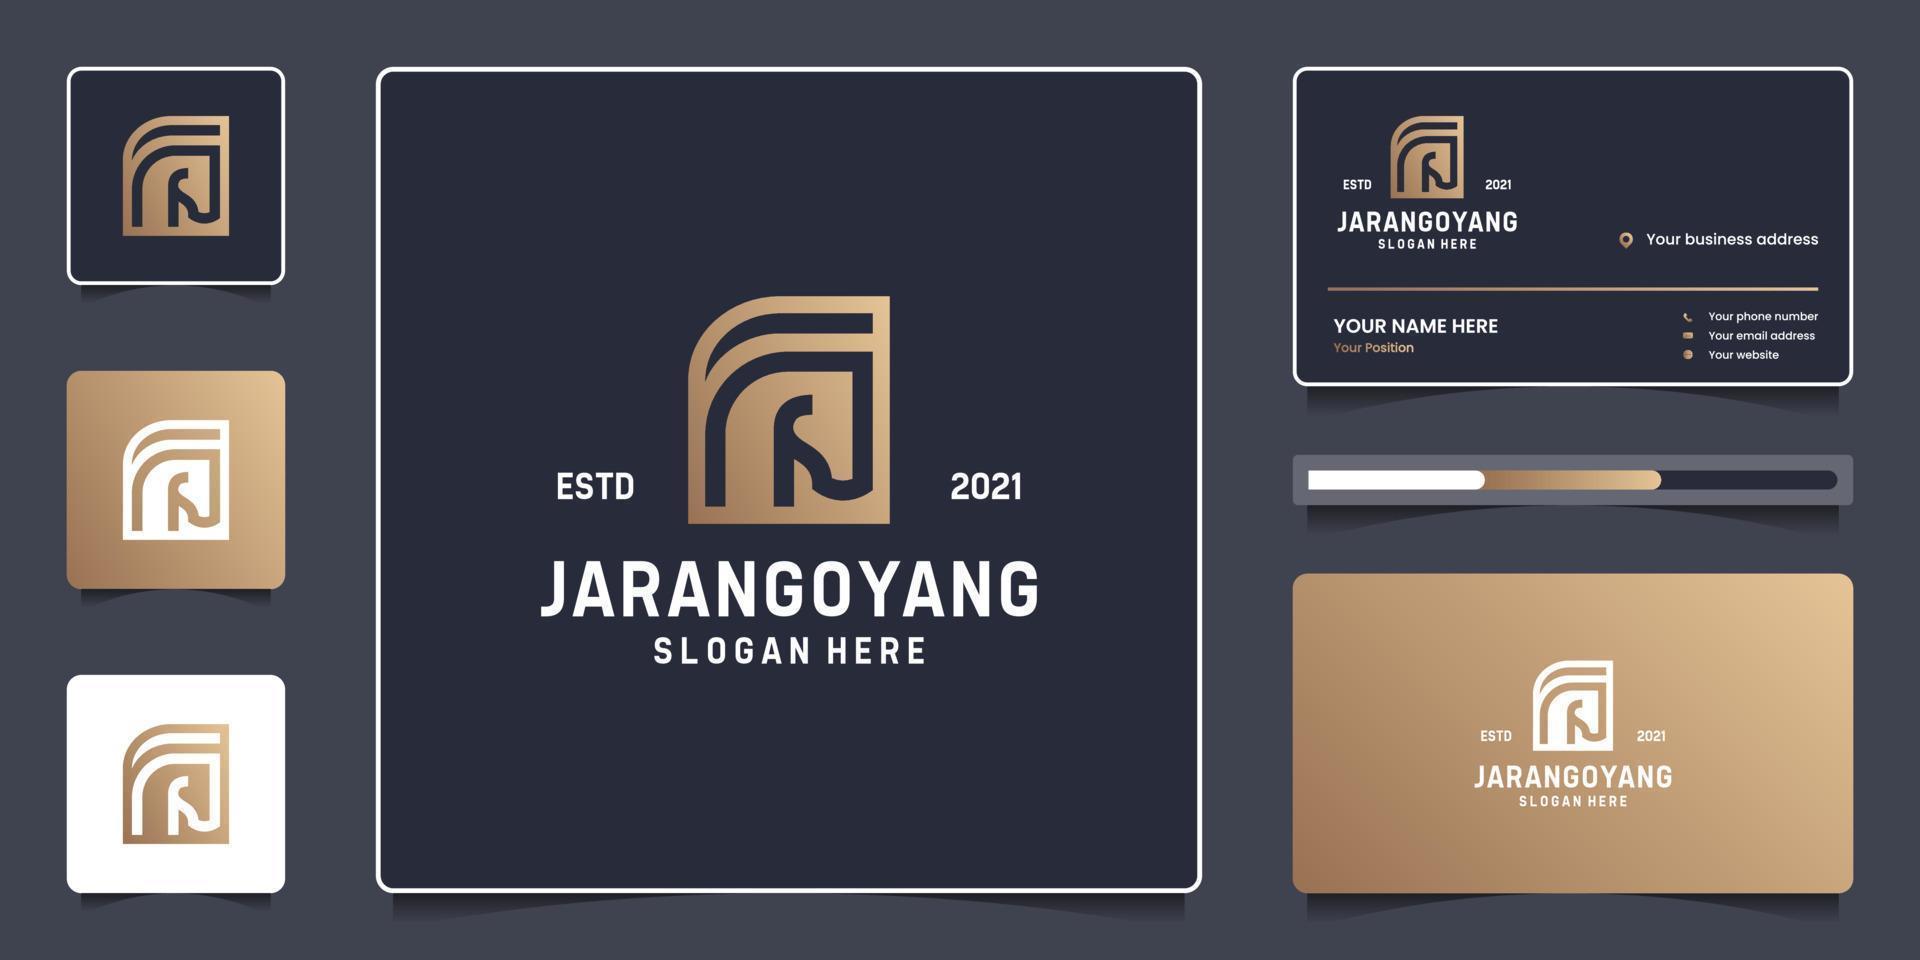 Flat minimalist horse logo element with business card design vector